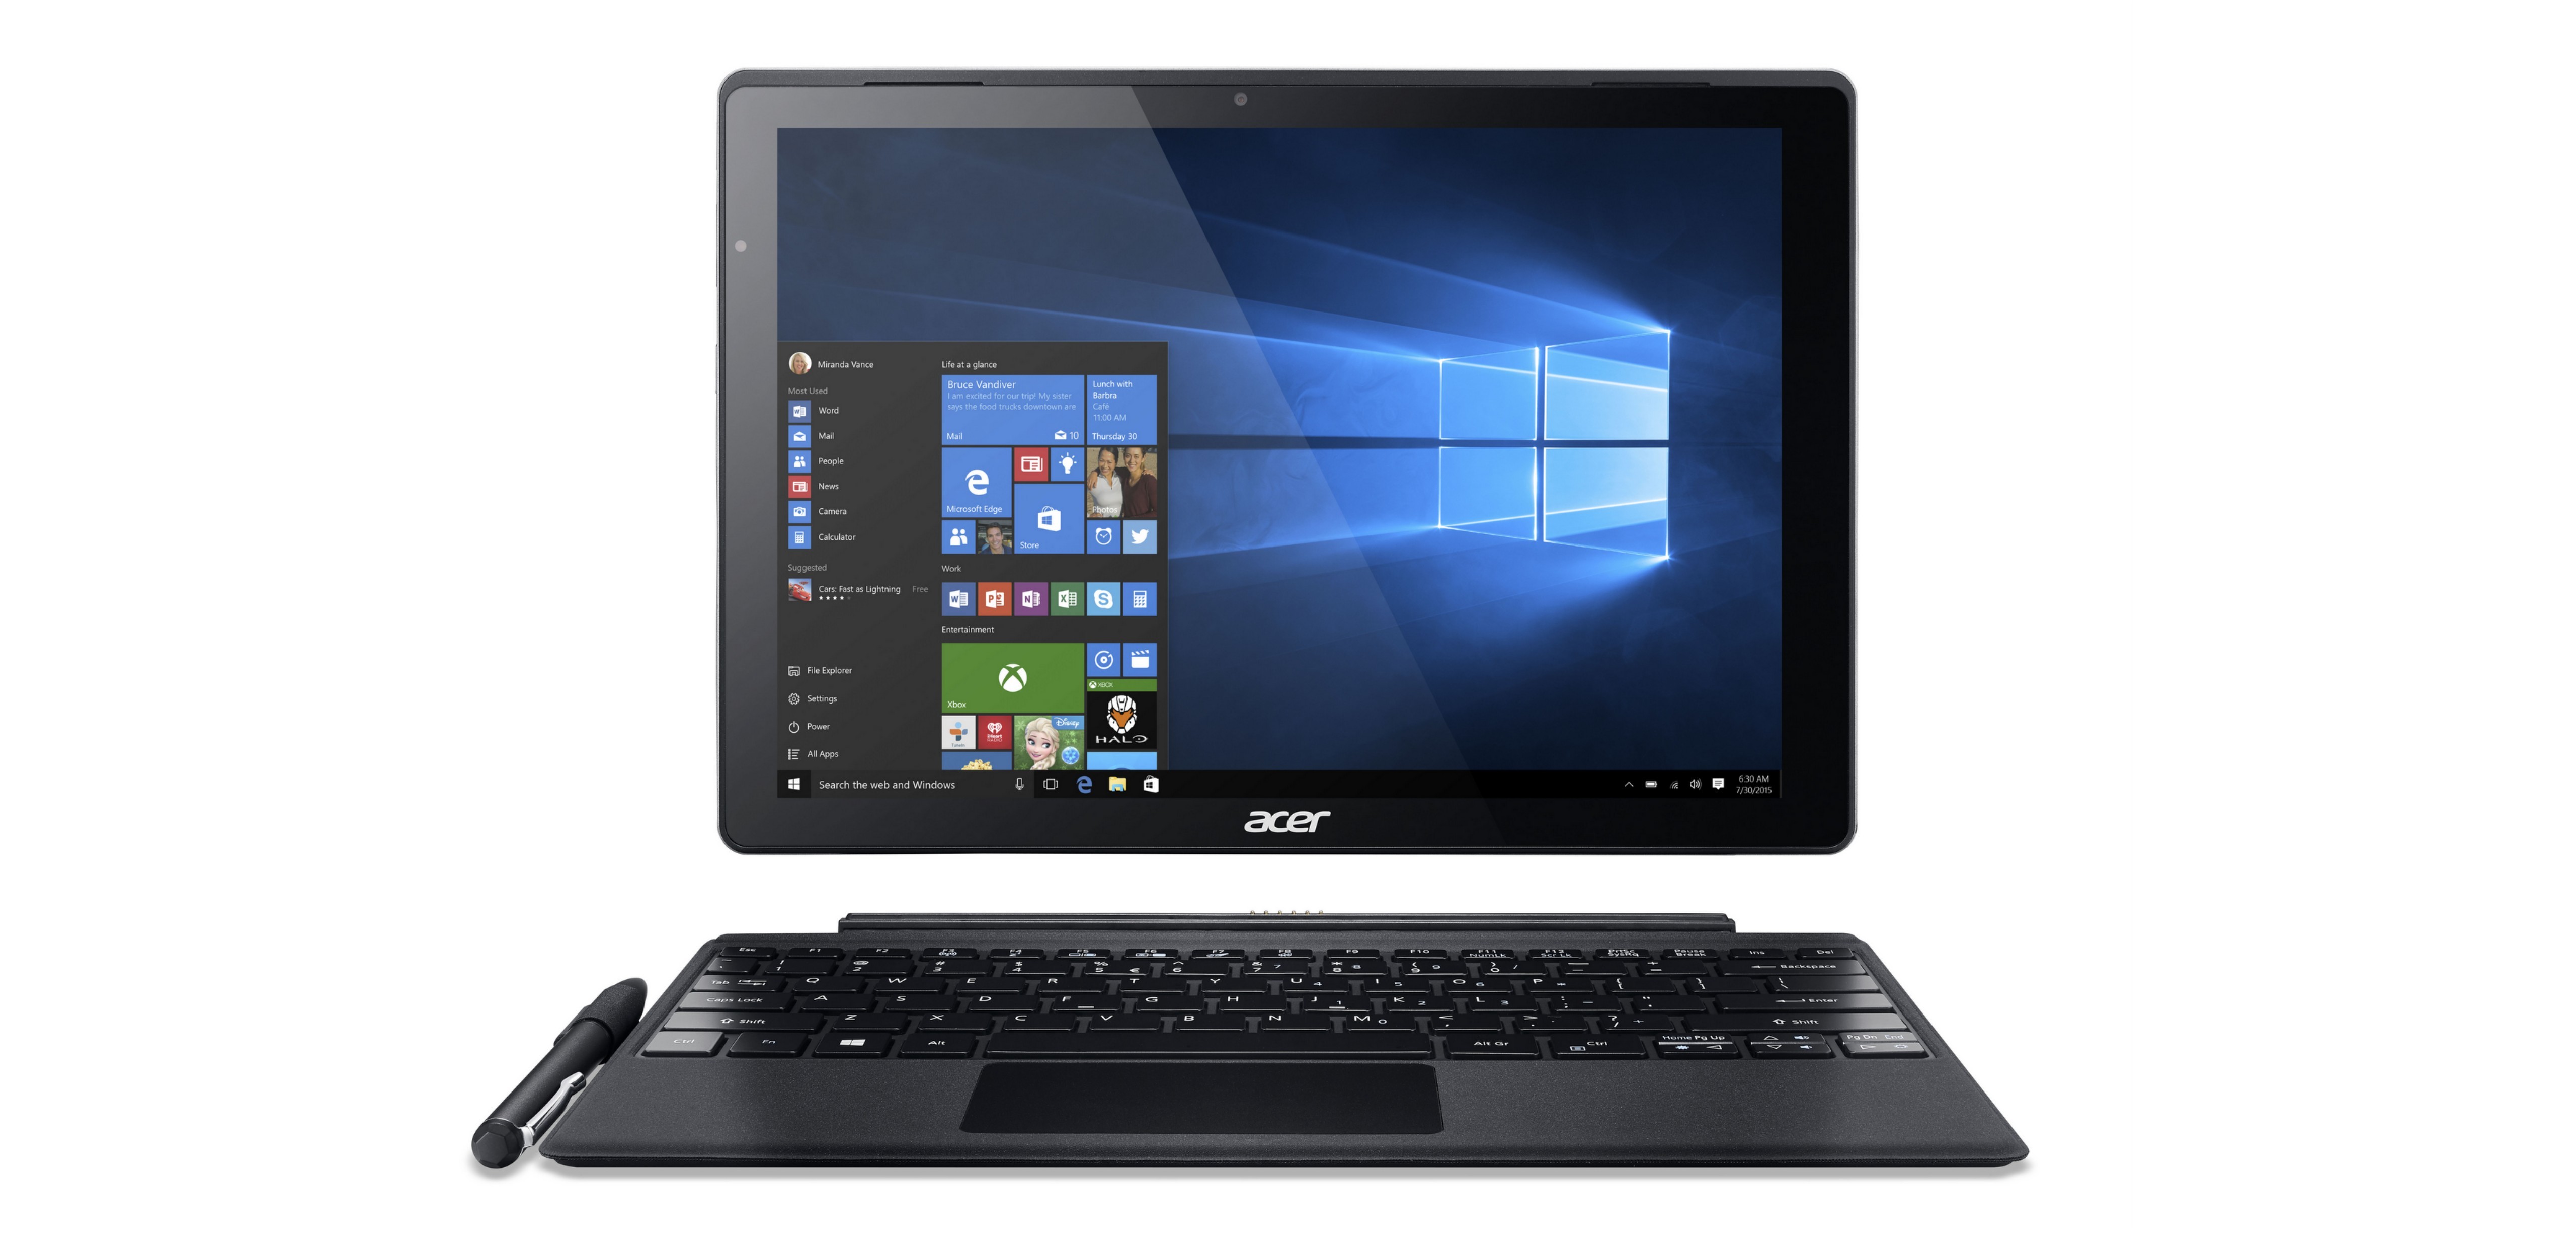 The Acer Switch Alpha 12 with Windows 10